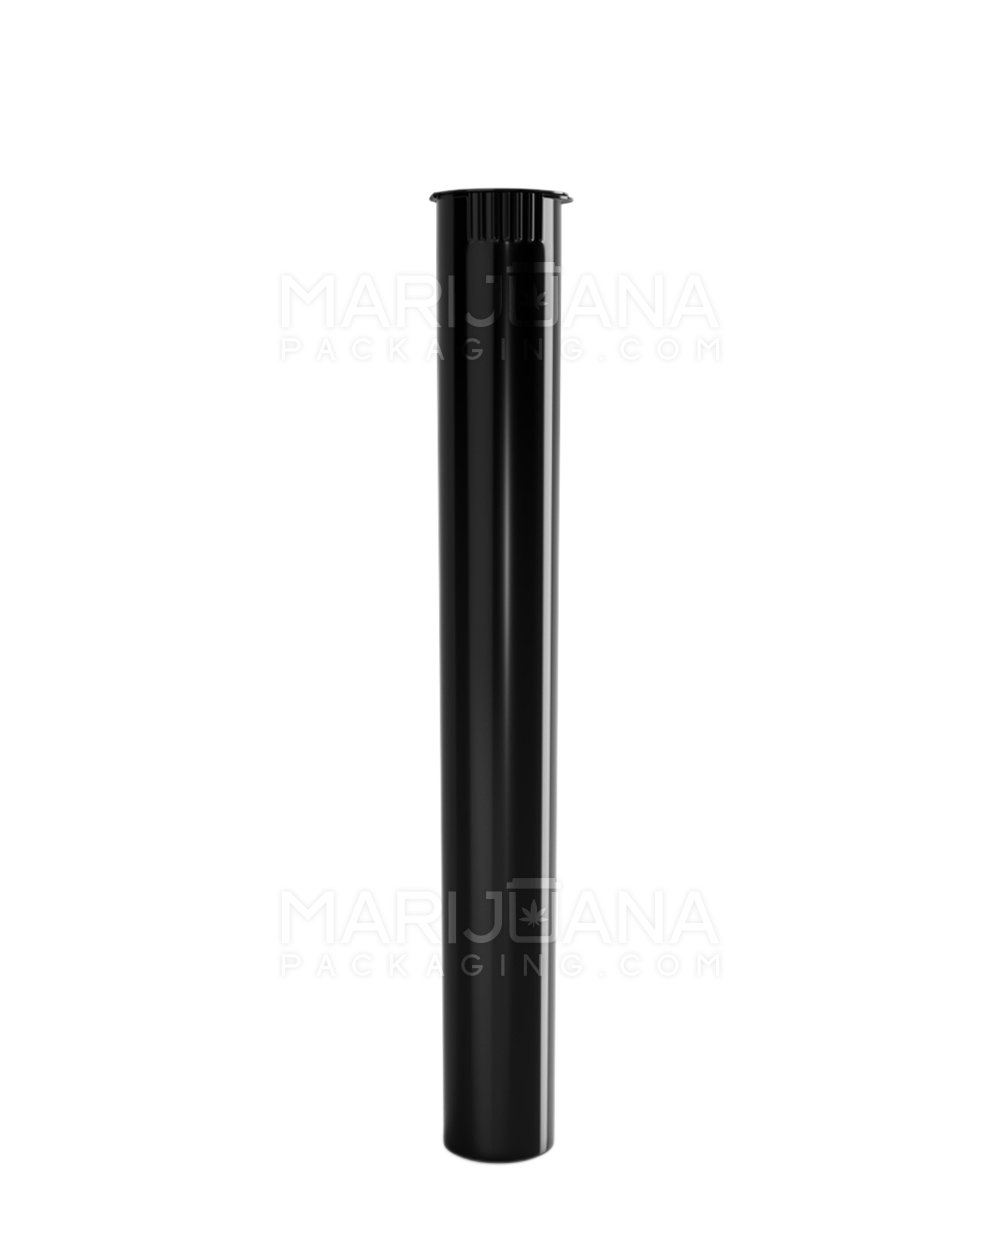 Child Resistant | King Size Pop Top Opaque Plastic Pre-Roll Tubes | 150mm - Black - 1400 Count - 2